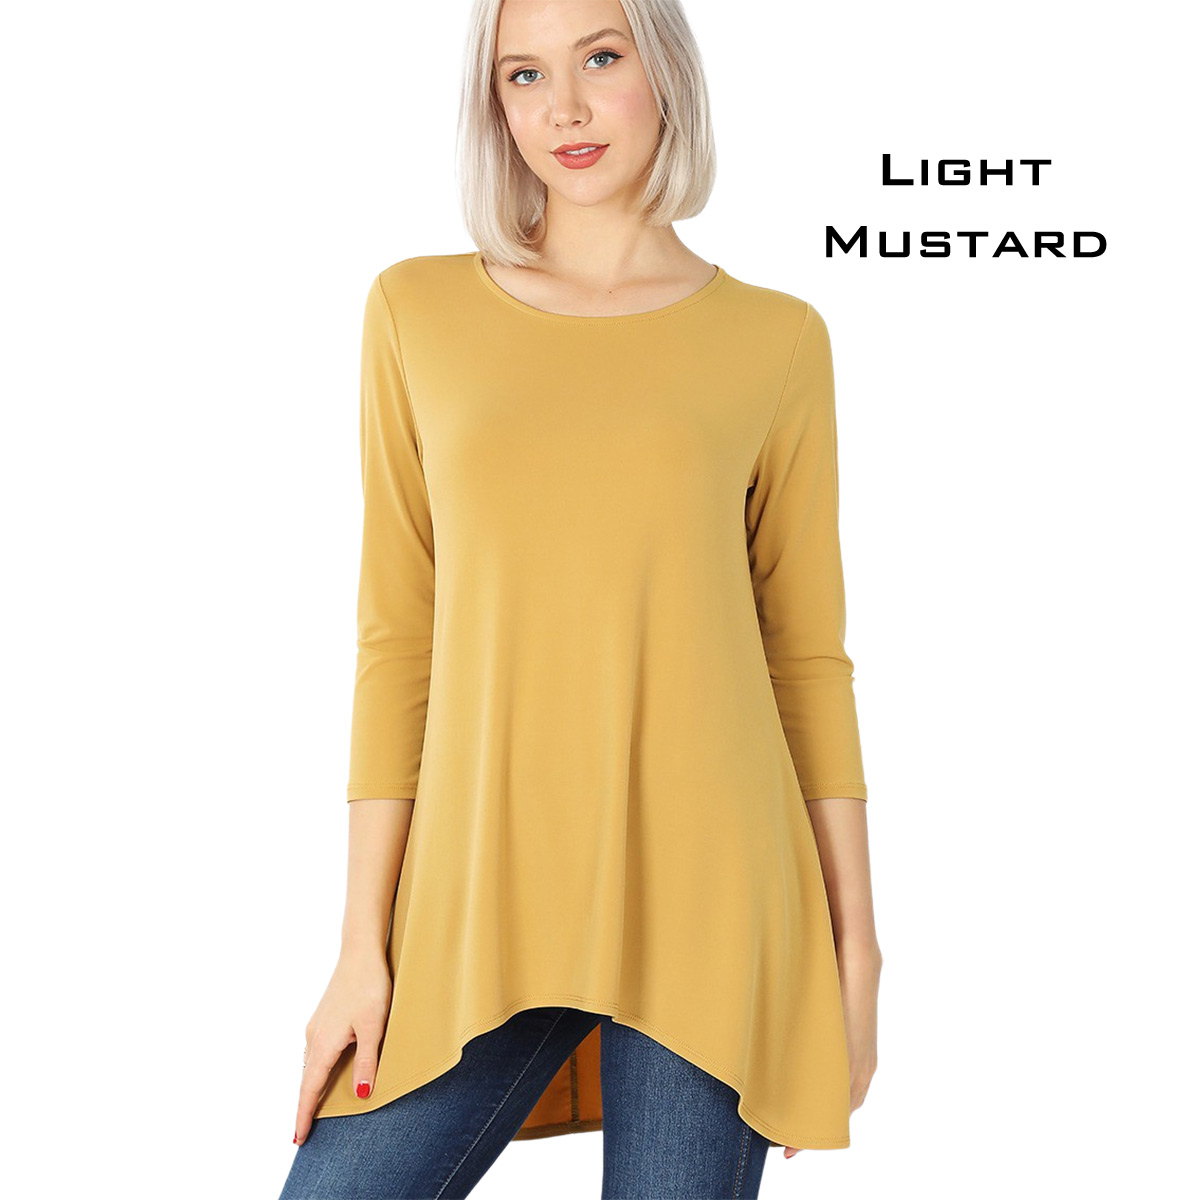 2367 - Ity High-Low 3/4 Sleeve Top Light Mustard Ity High-Low 3/4 Sleeve Top 2367 - Small